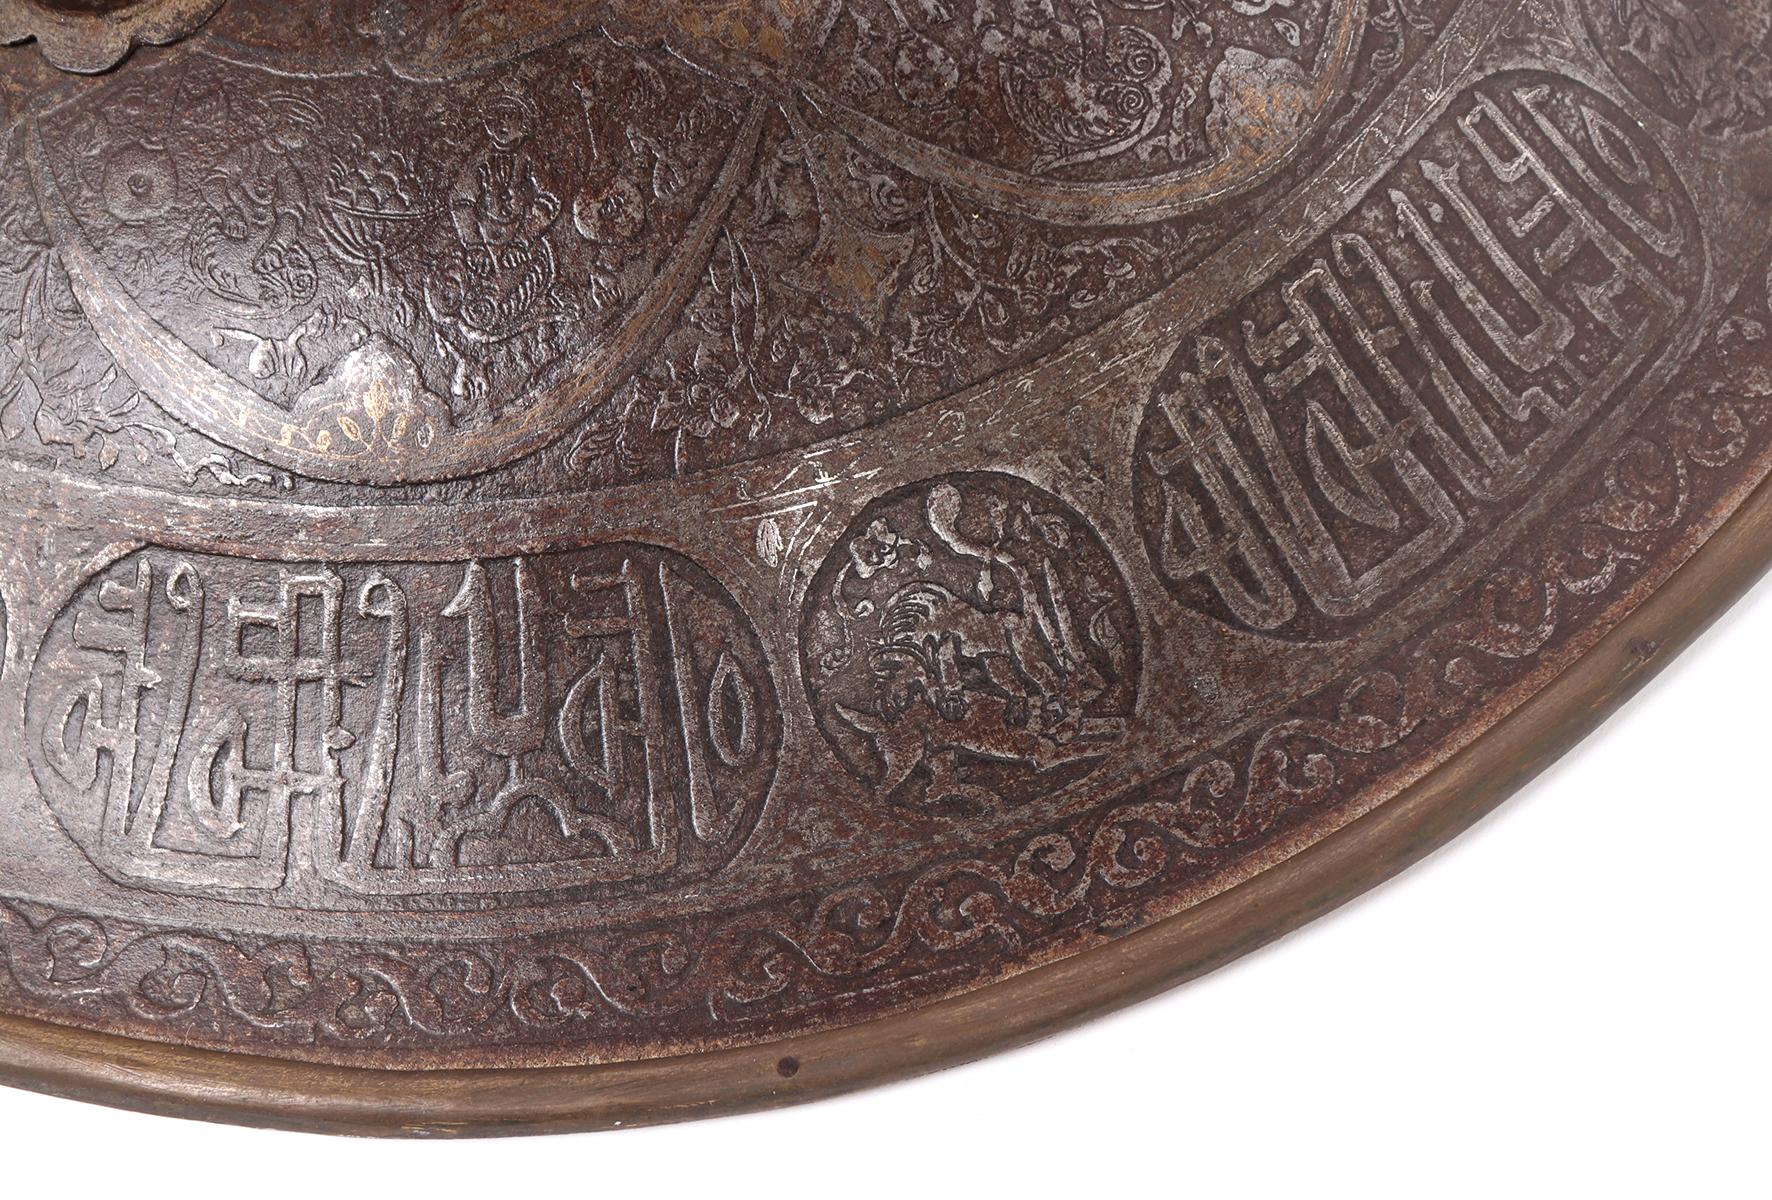 Heavily Detailed Indian Copper & Silver Inlayed Dahl